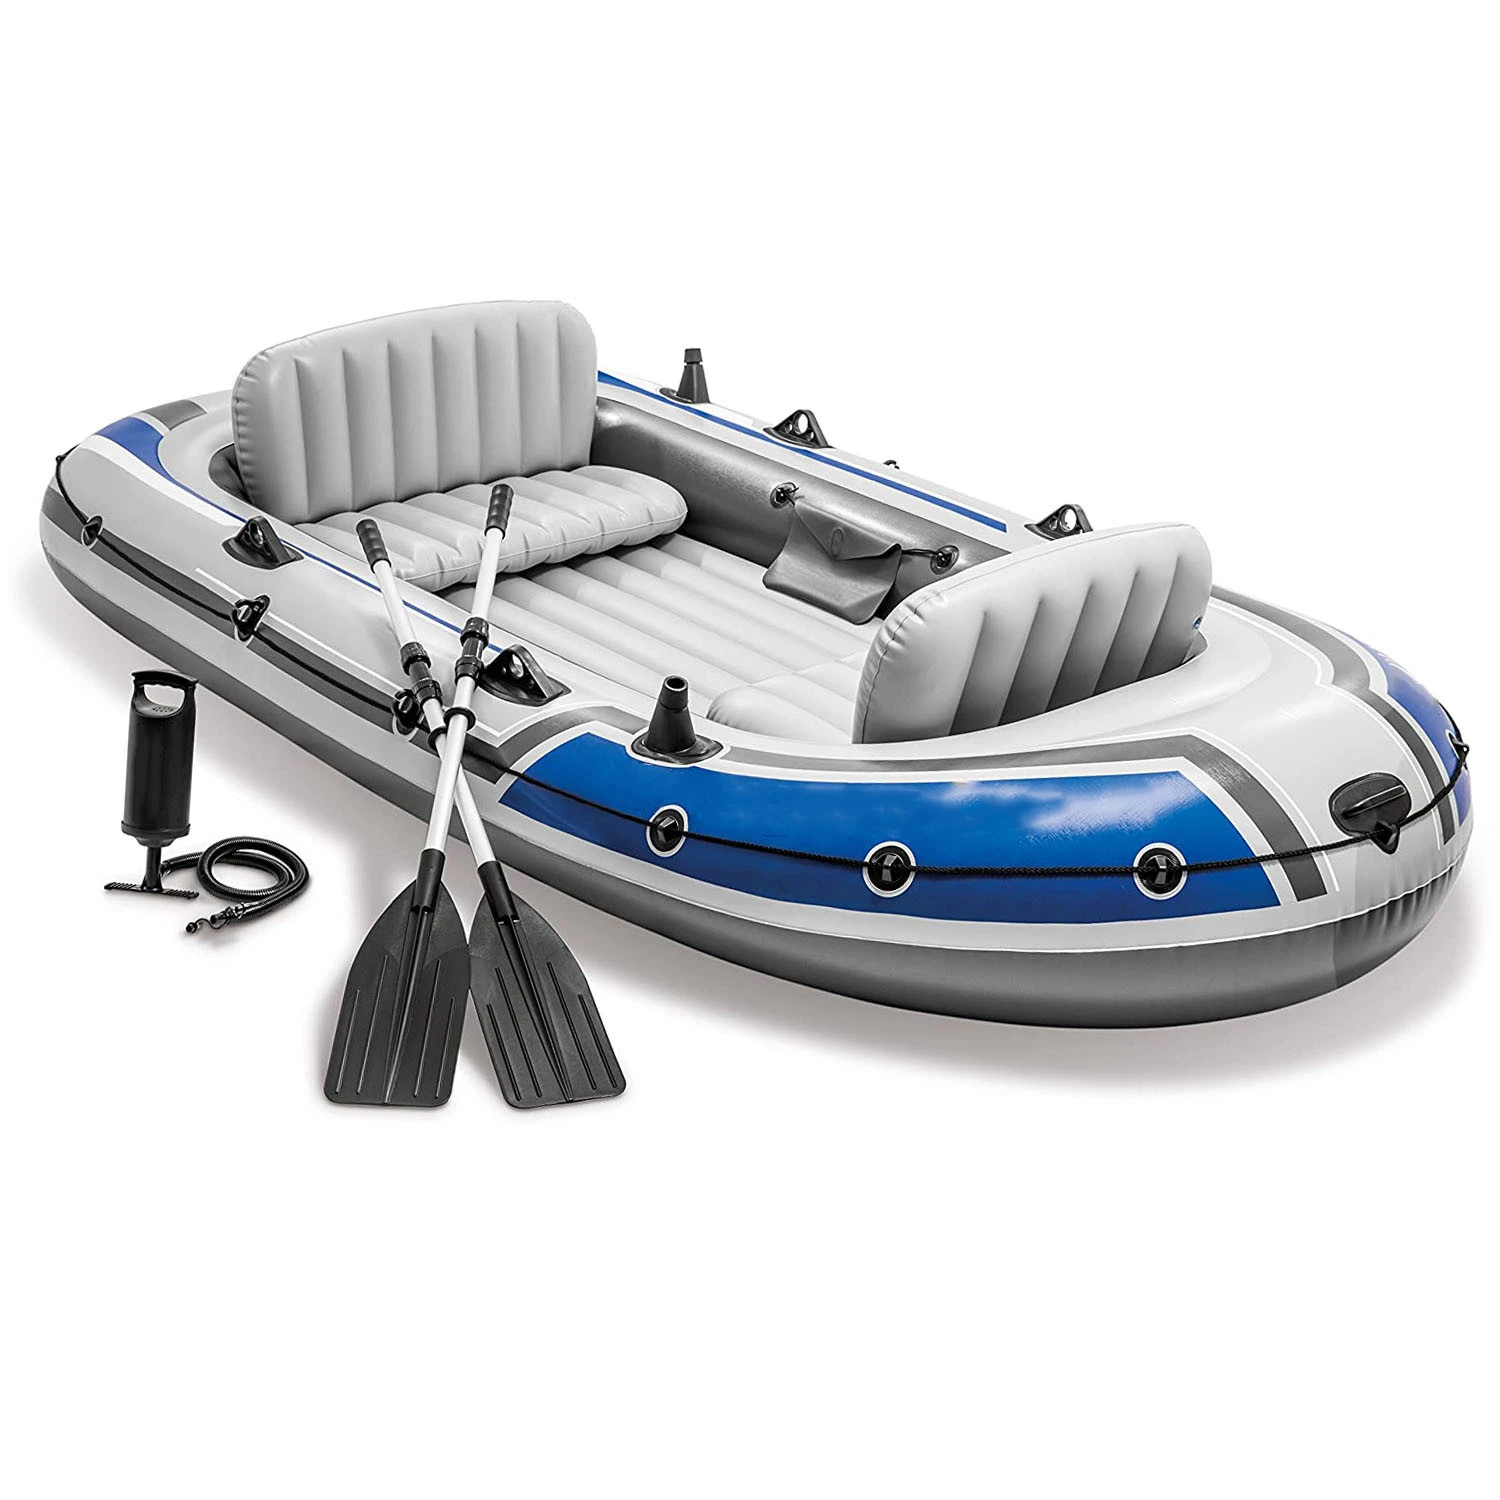 Durable High quality PVC Inflatable canoe fishing boat inflatable kayak 2 person with pedals &amp; paddle Various sizes